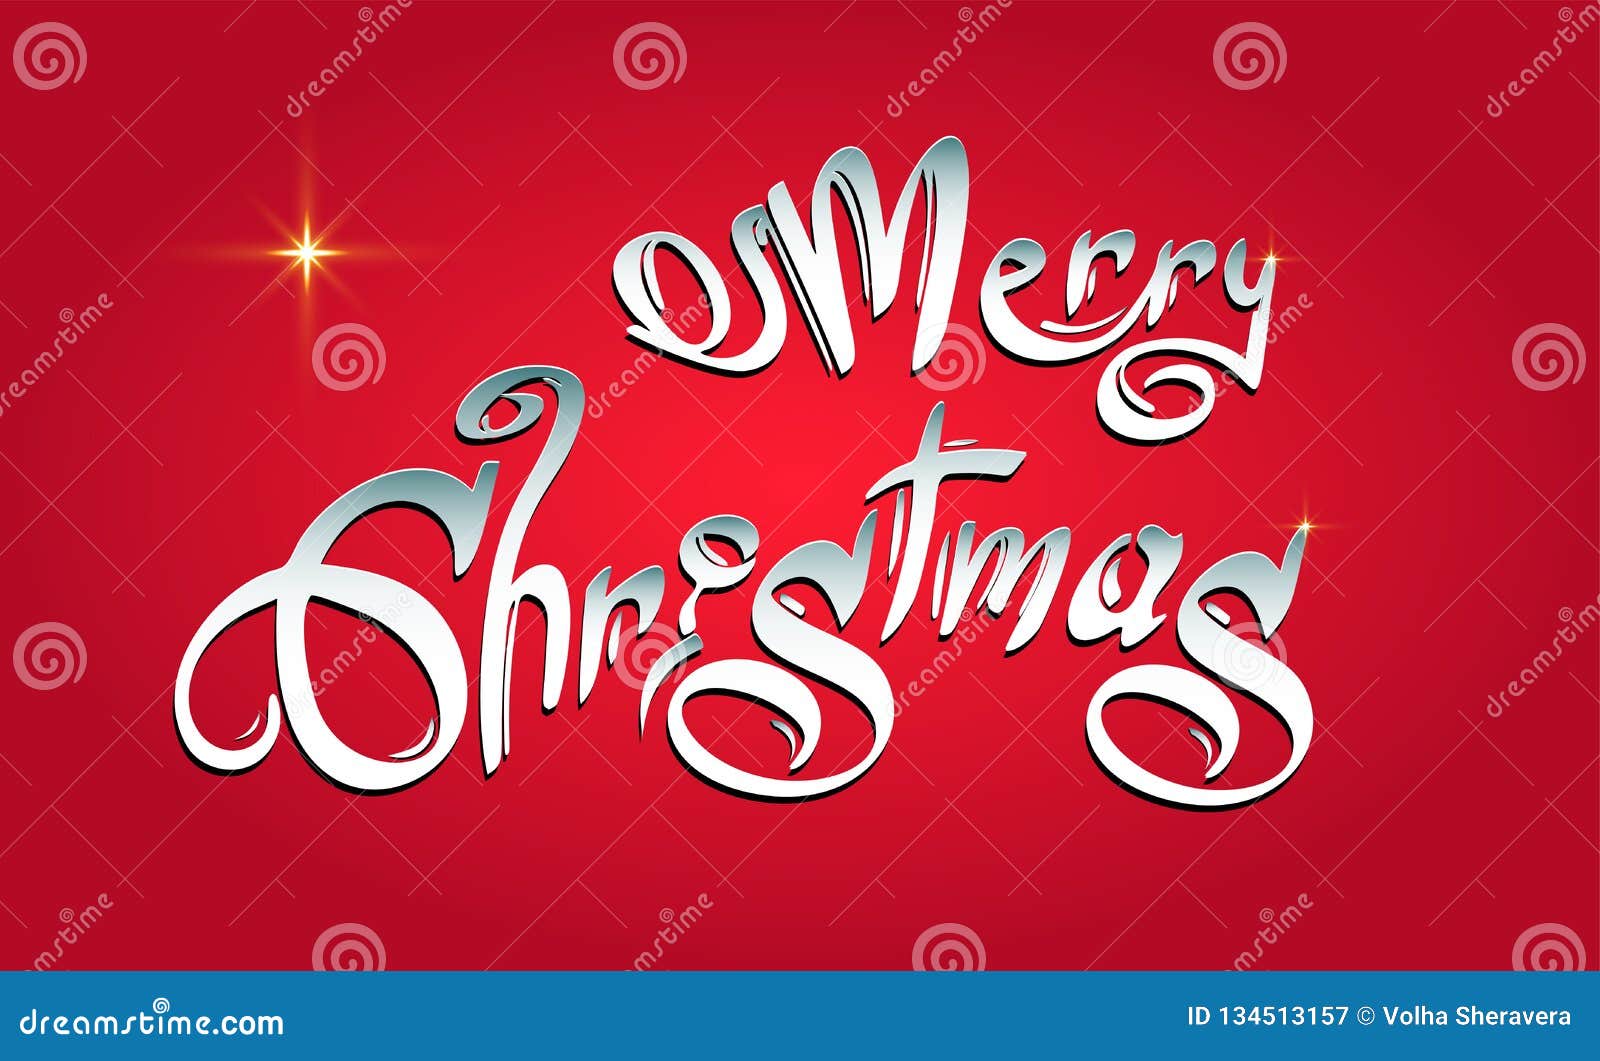 Merry Christmas Hand Drawn Text, Font, Type Composition Stock Vector ...